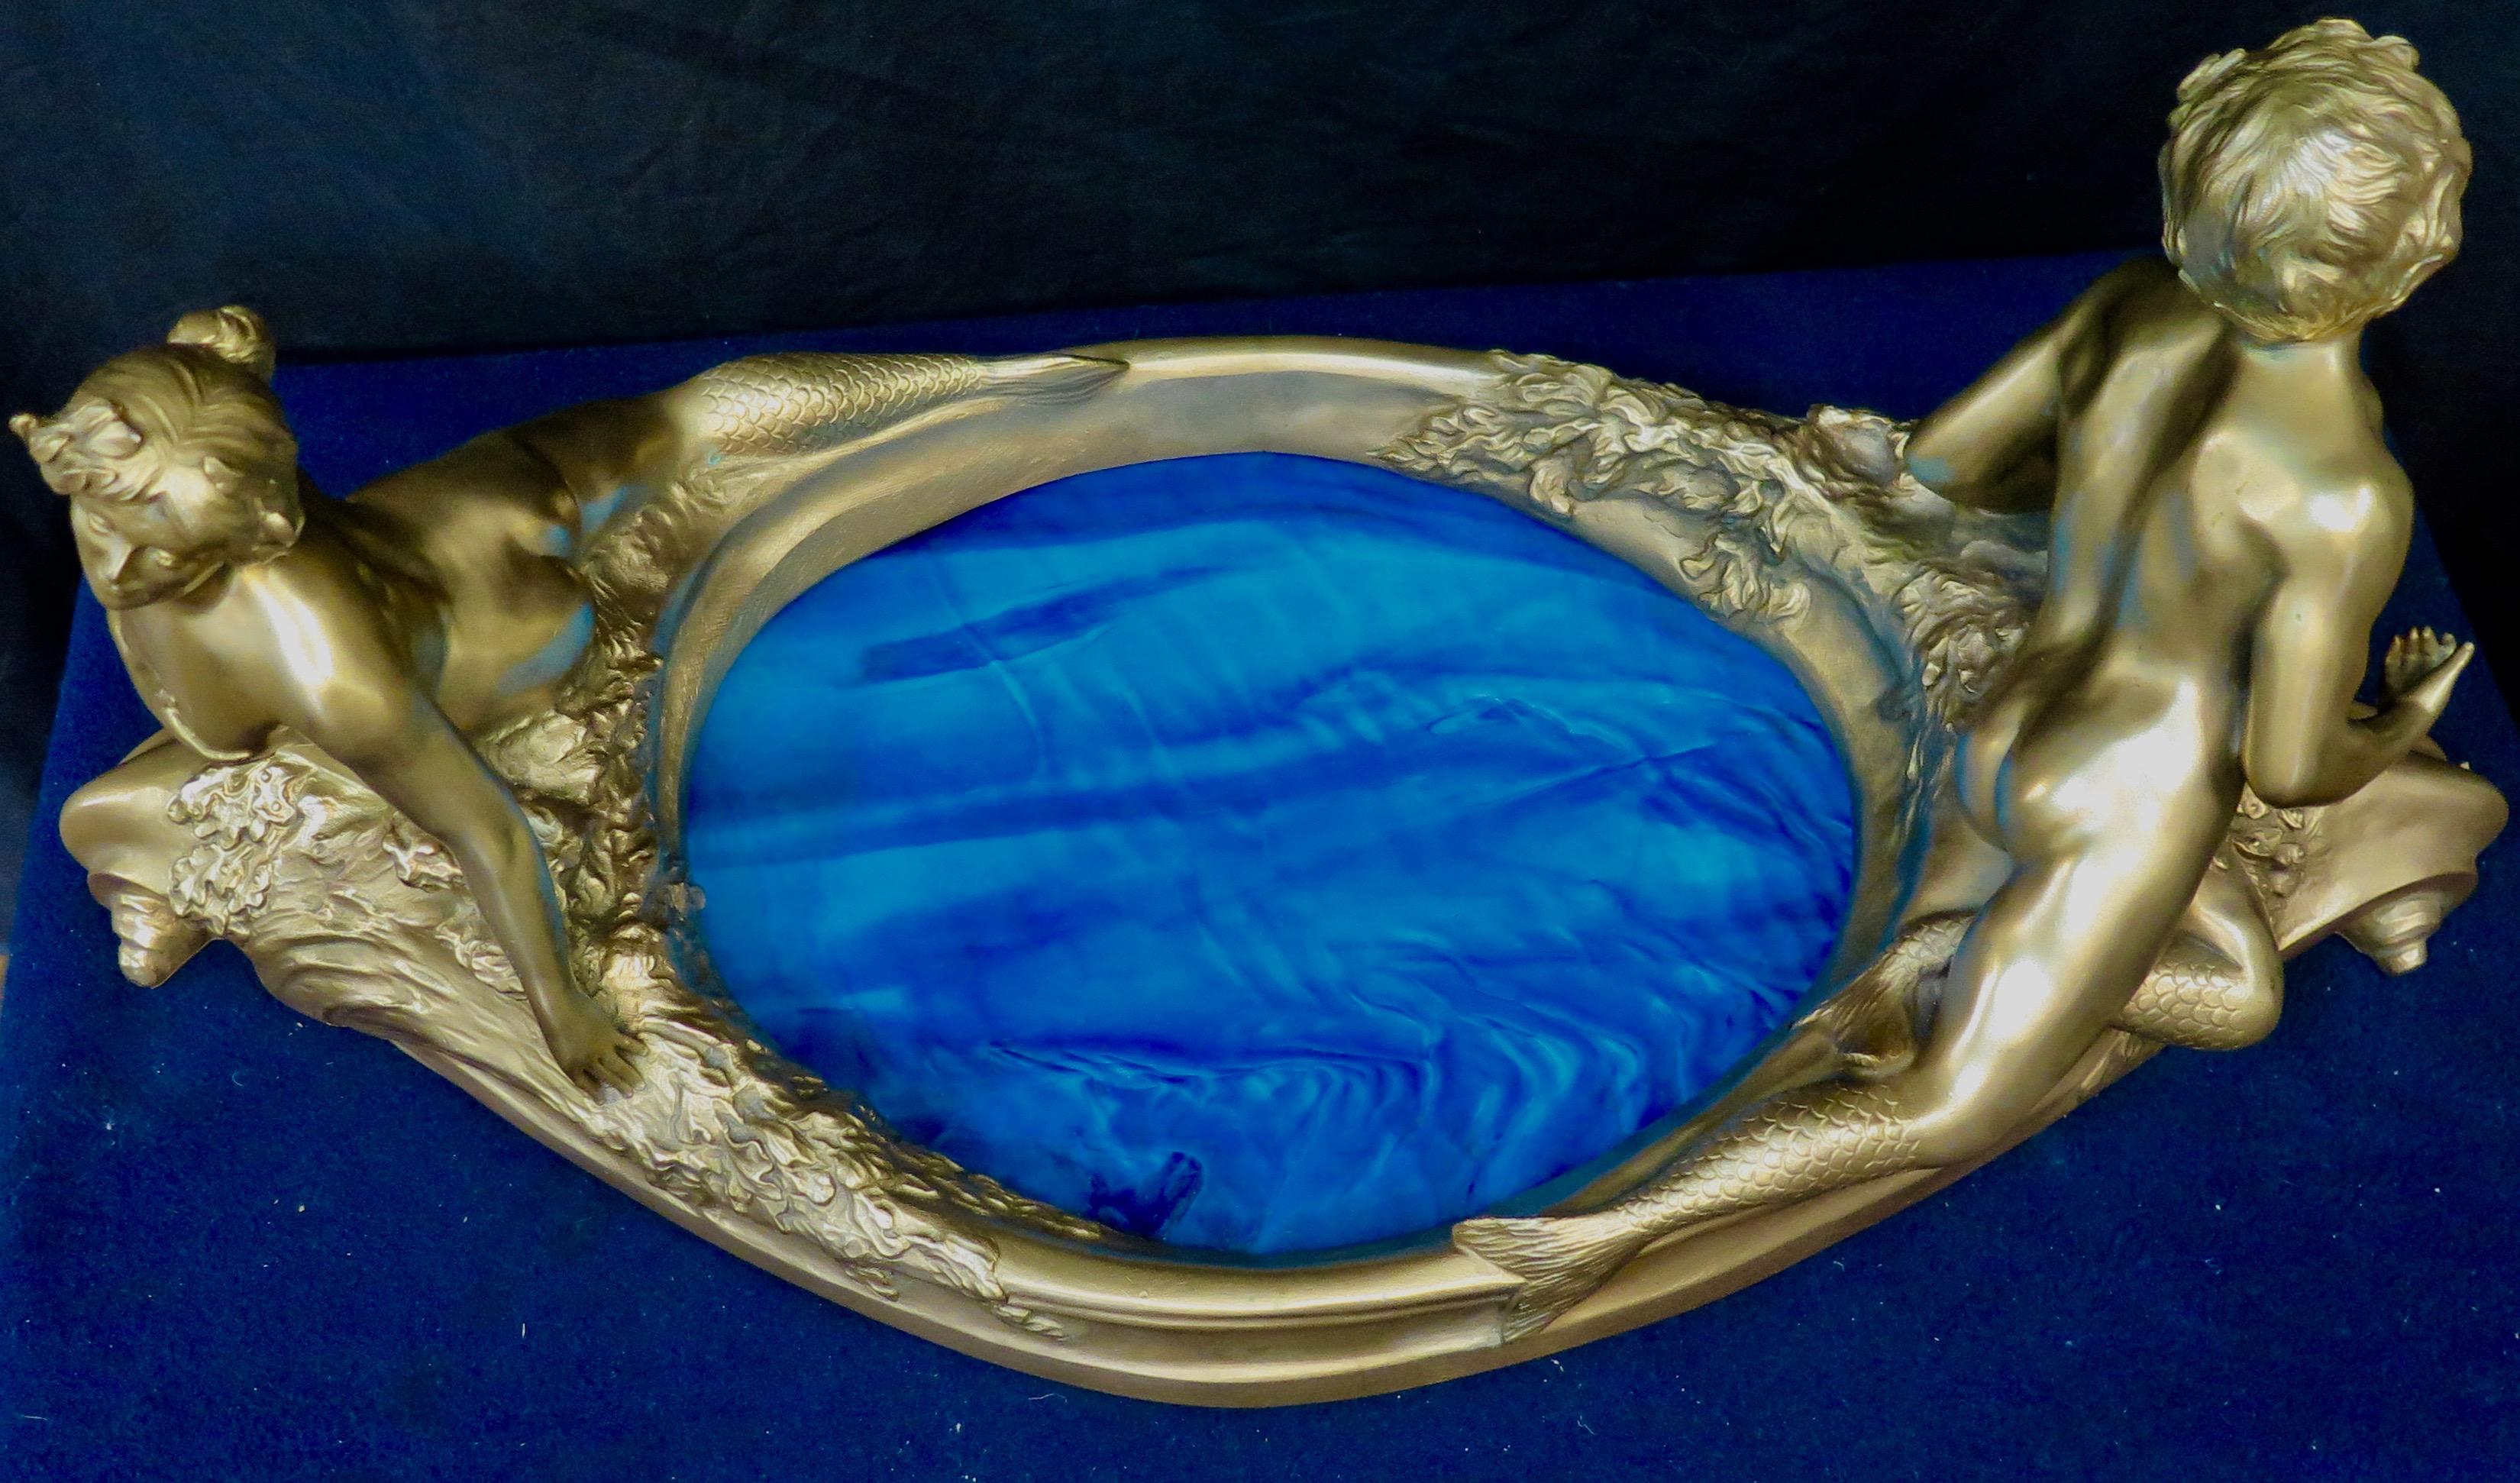 This vintage Art Nouveau doré bronze French centerpiece features a pair of stunning mythological nude figures positioned on either end of an oval POOL designed in blue ripple art glass. The nude man & woman are exceptionally well detailed & adorned